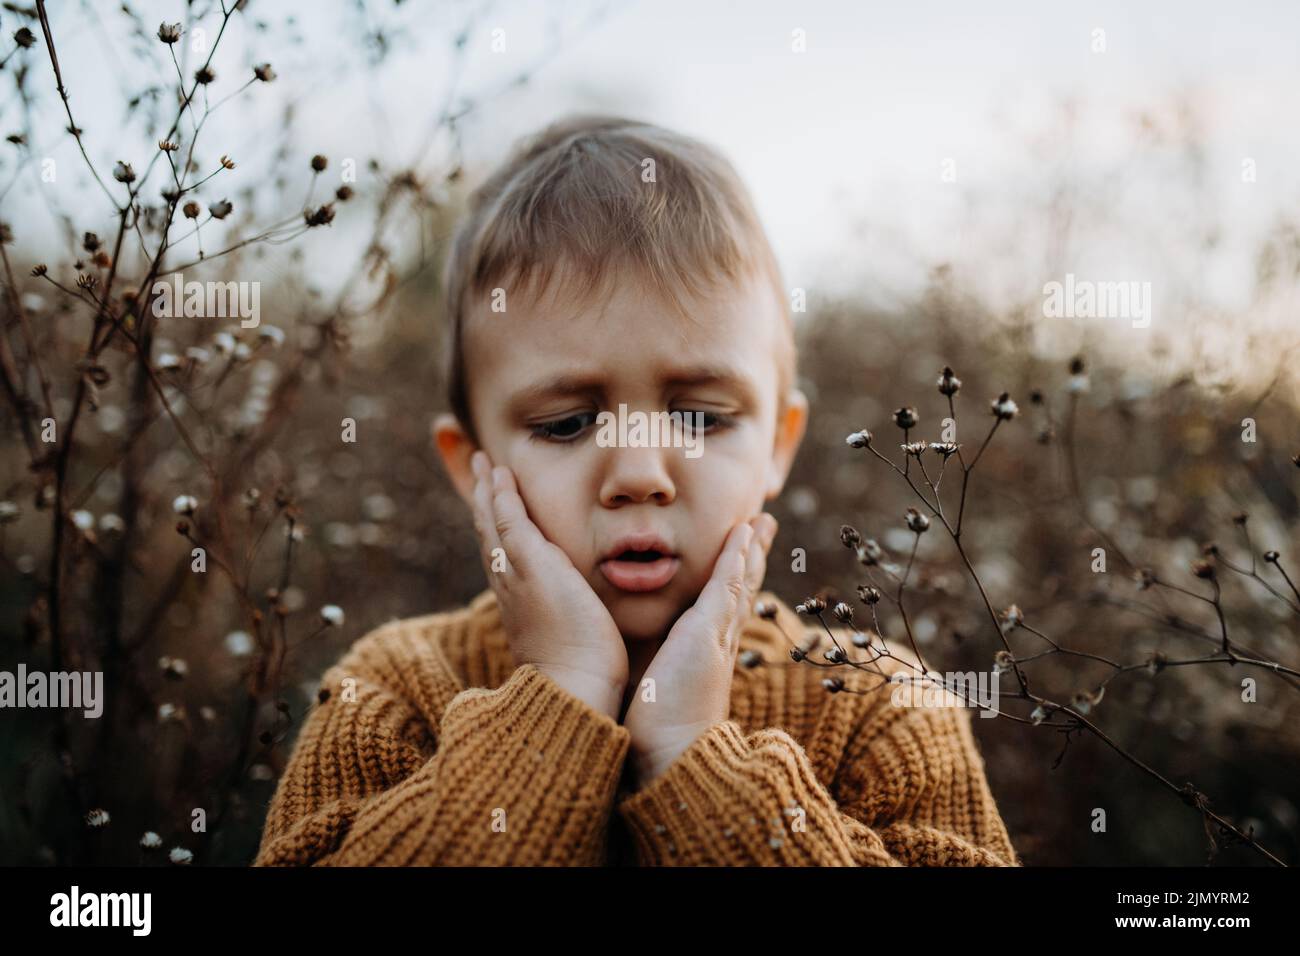 Portrait of sad, worried little boy wearing knitted sweater in nautre, autumn concept. Stock Photo